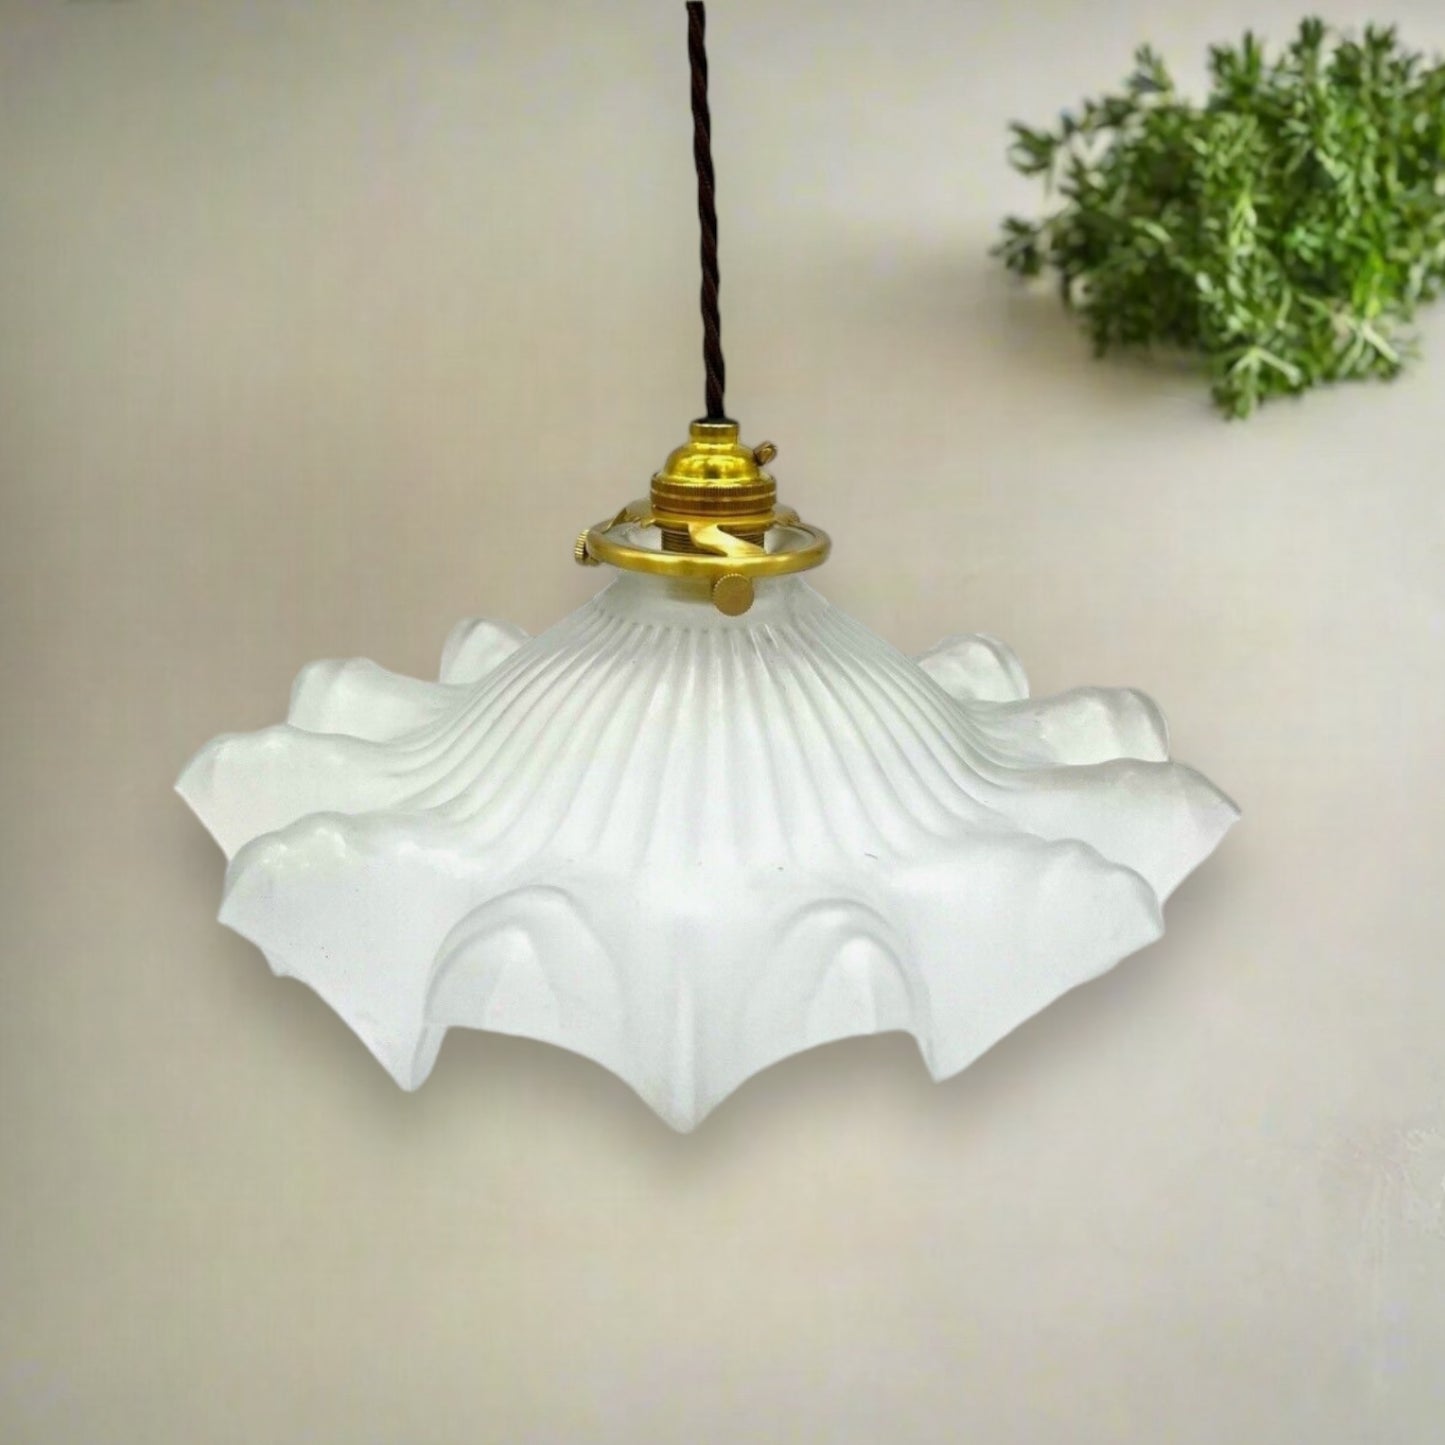 image French vintage glass ceiling lamp shade sold by All Things French Store